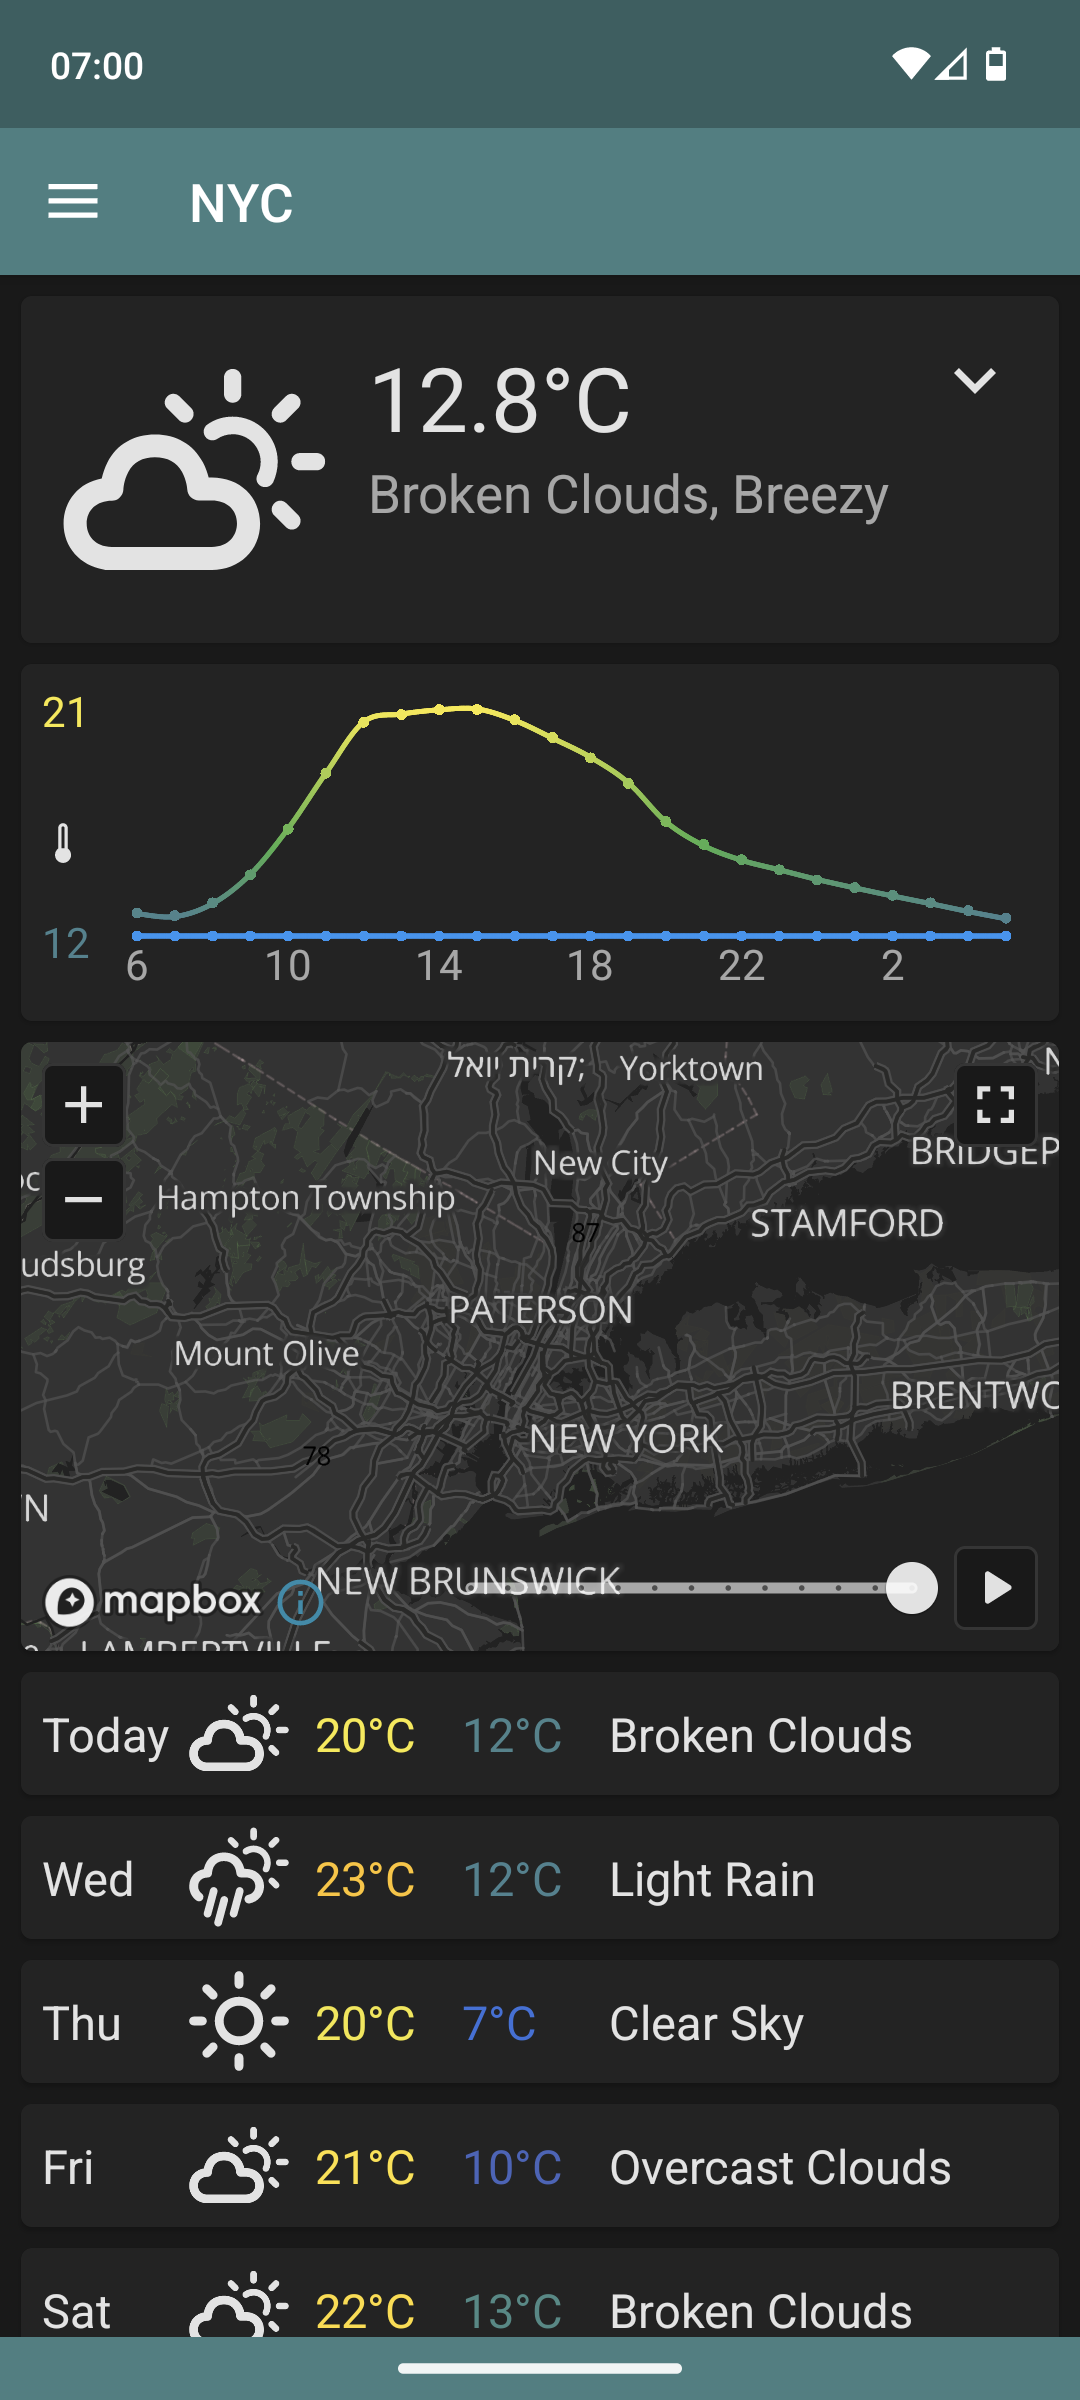 a weather app screenshot. At the top, a graph shows a temperature throughout the day. At the bottom, a satellite map of New York City area and below it the temperature ranges for the rest of the week